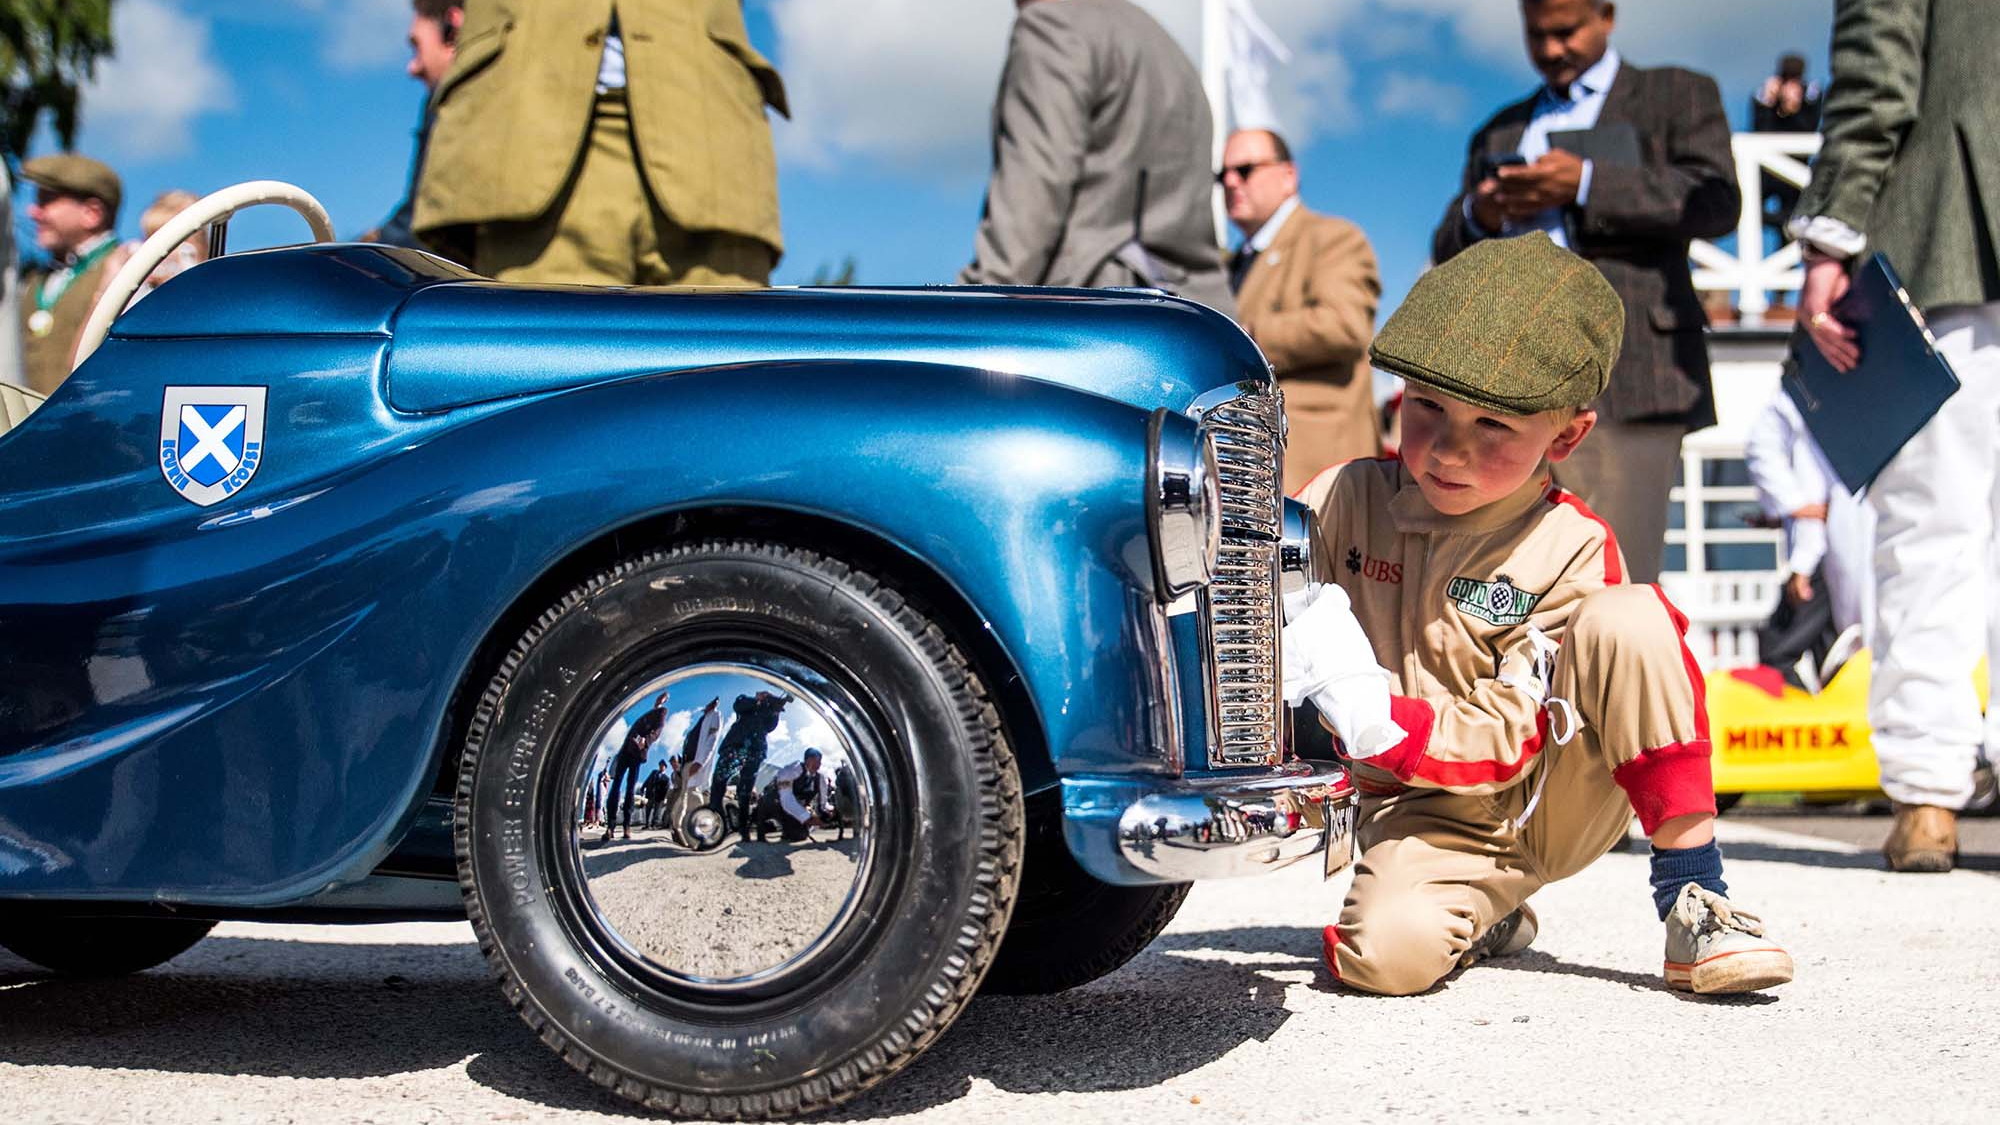 Twenty Magnificent Years of the Goodwood Revival